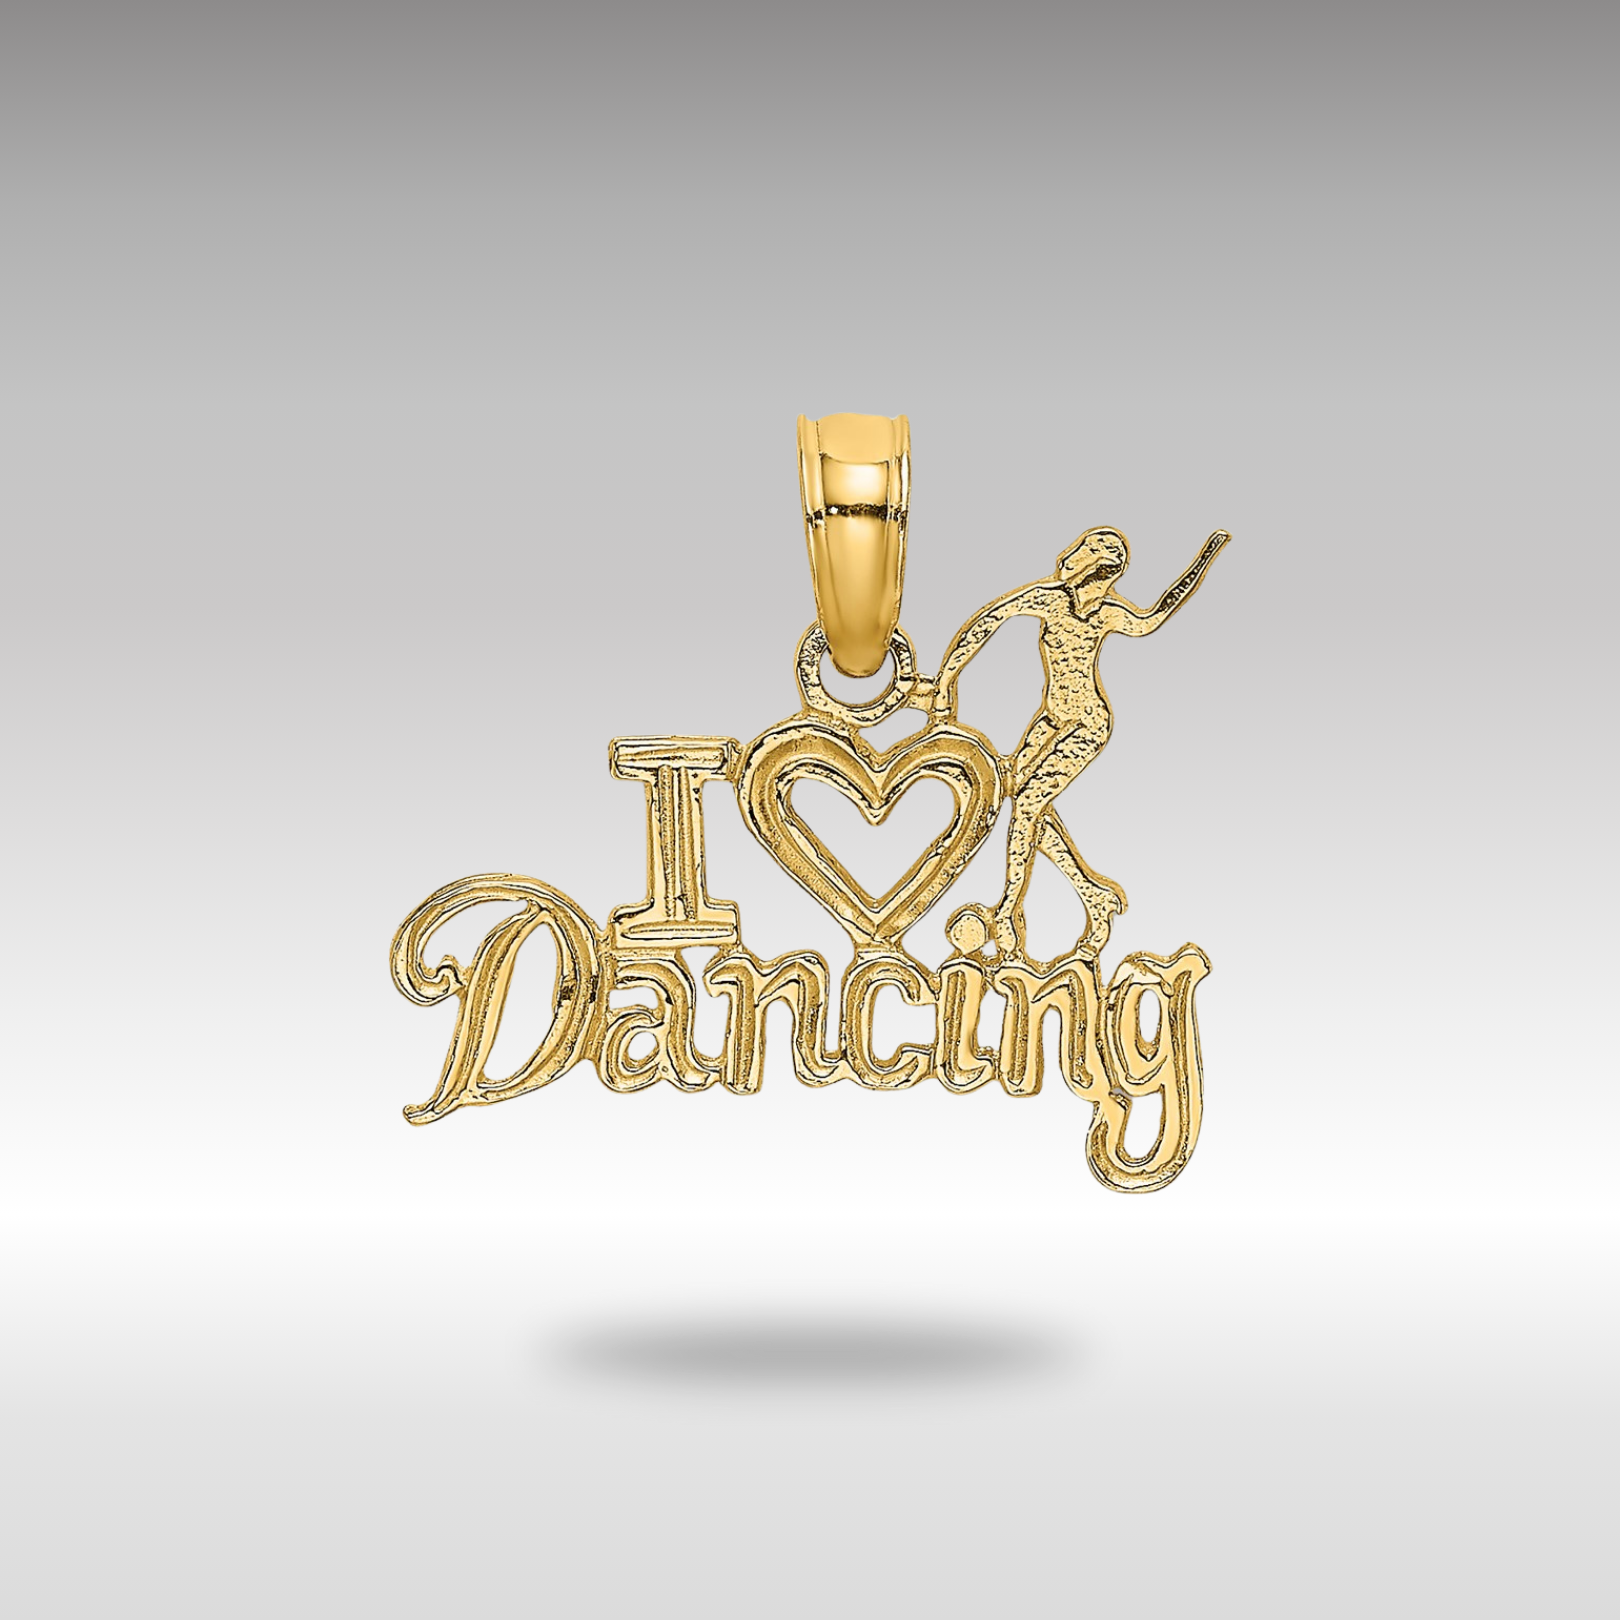 Gold 'I Heart Dancing' Necklace Pendant with Dancer Figure - Charlie & Co. Jewelry